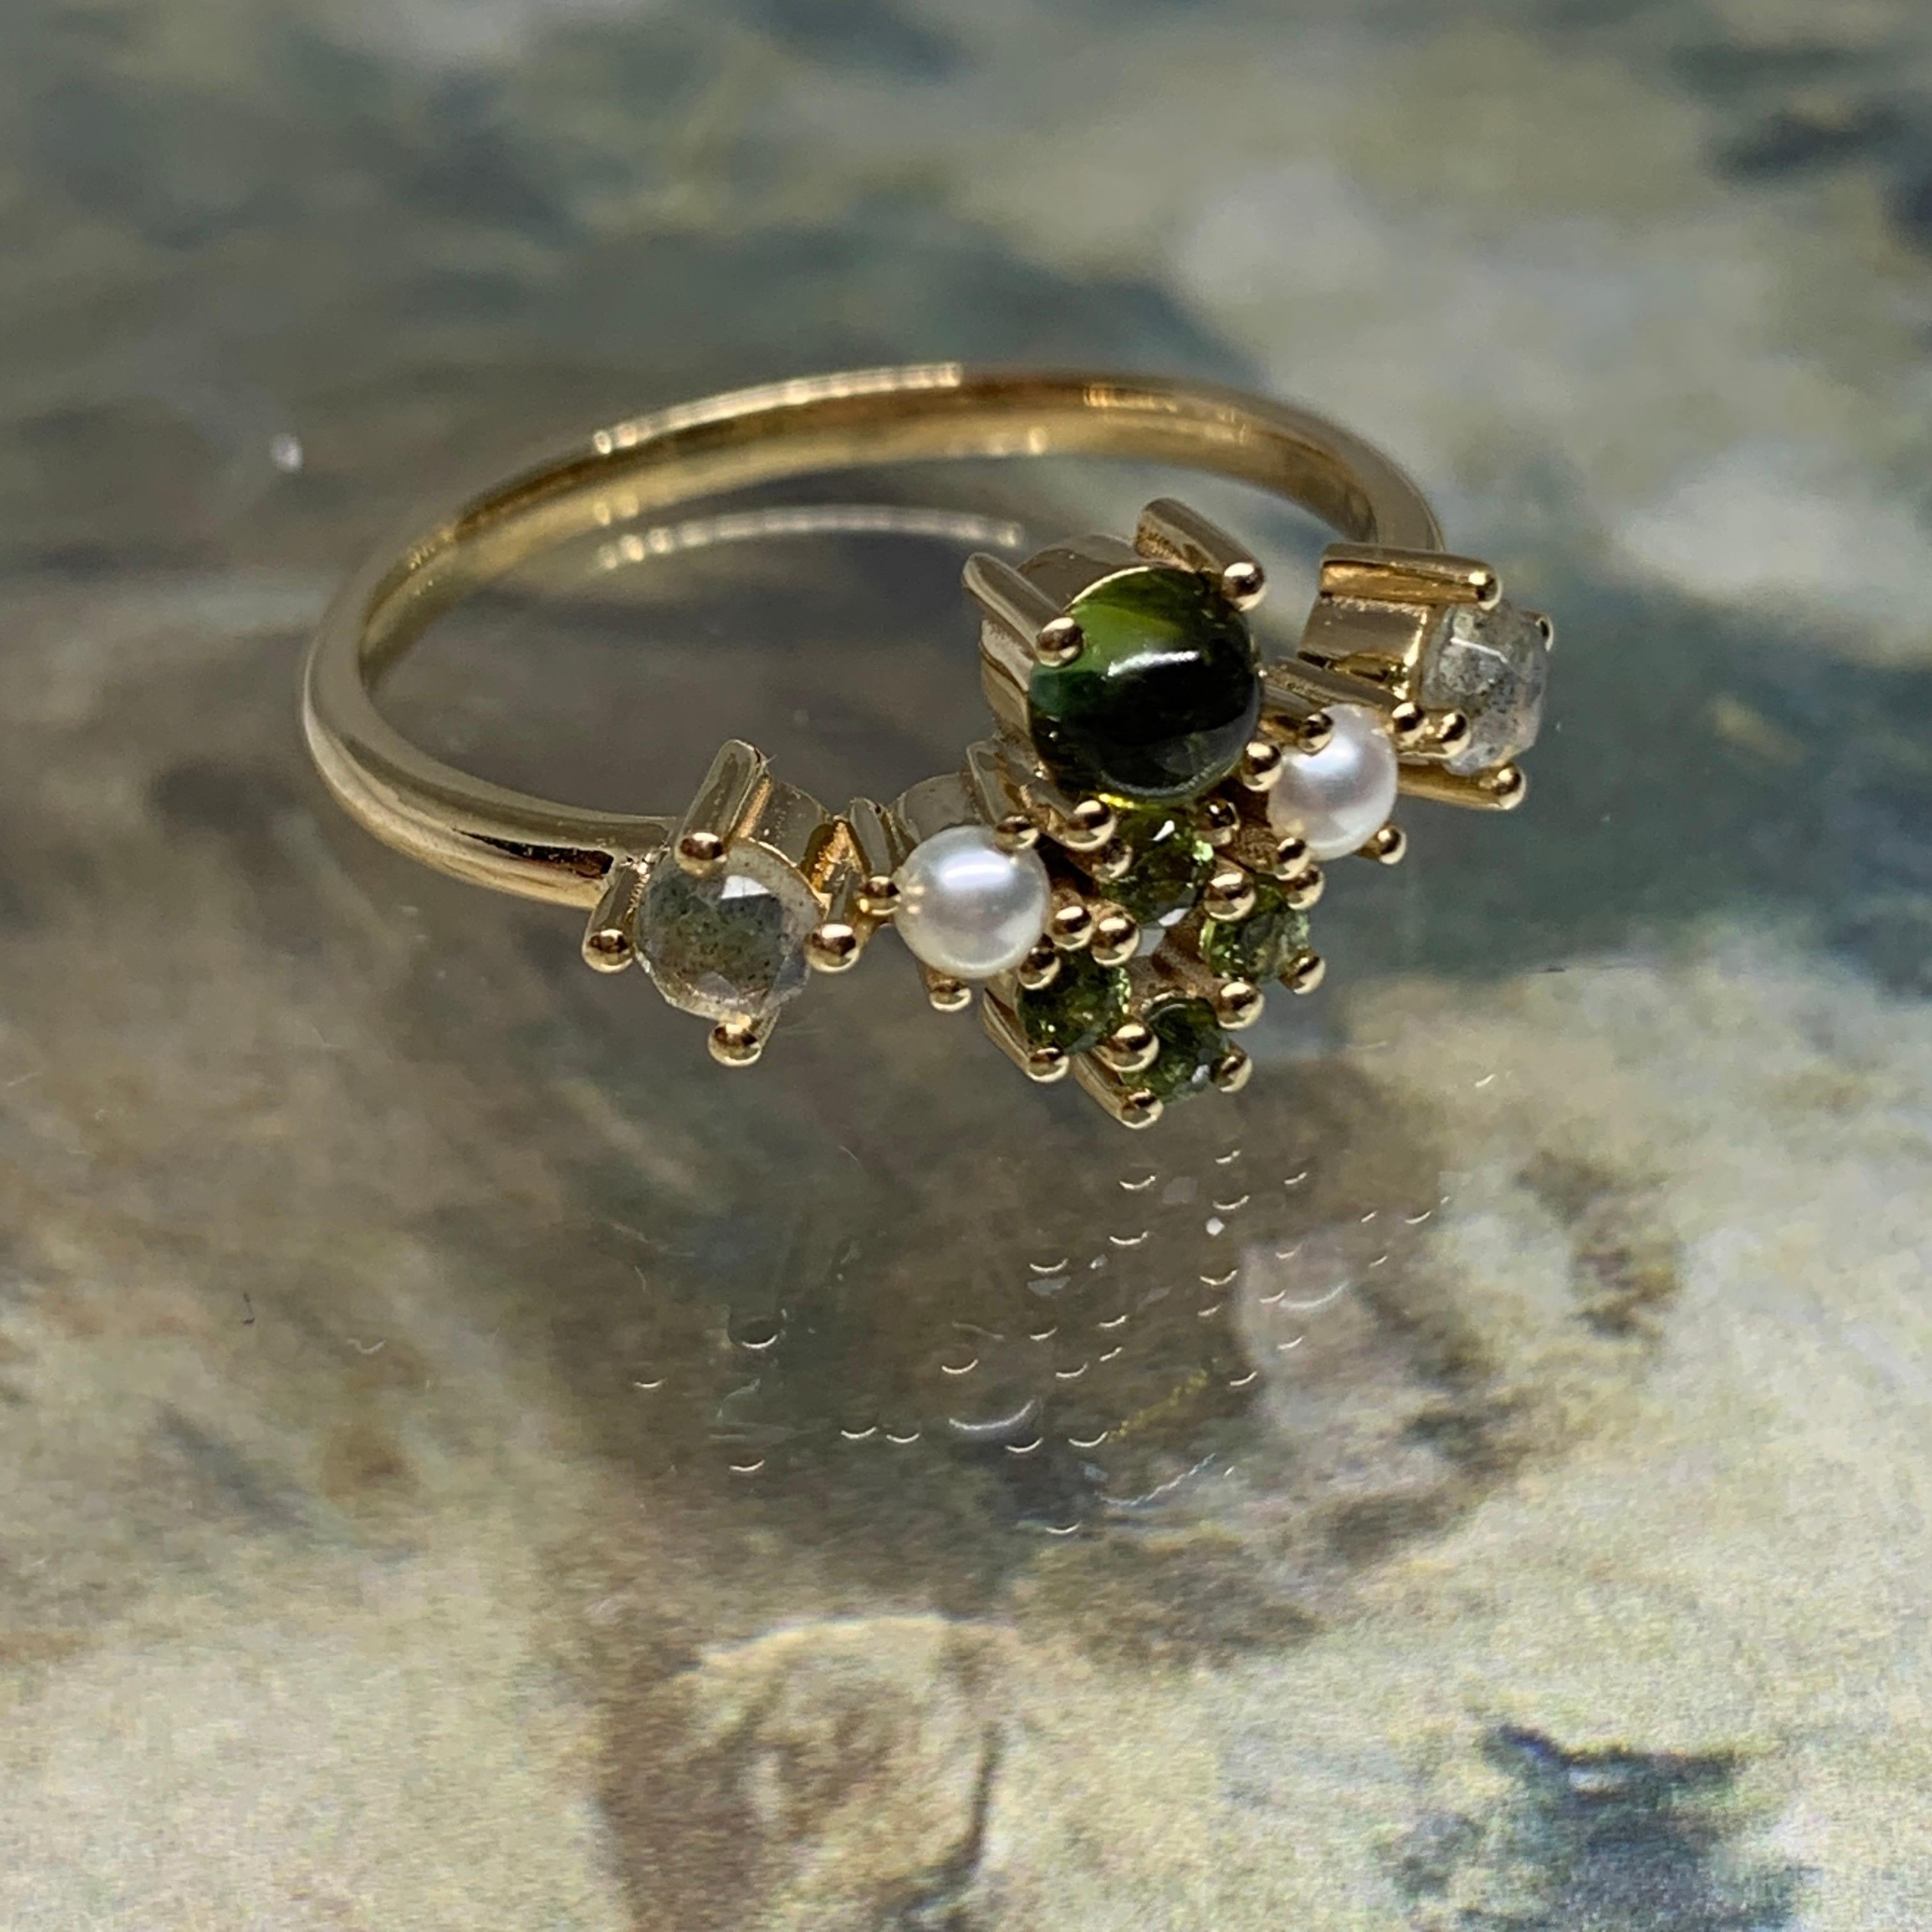 Women's Colourful 18 Karat Gold Ring with Tourmalines, Labradorites and Cultured Pearls